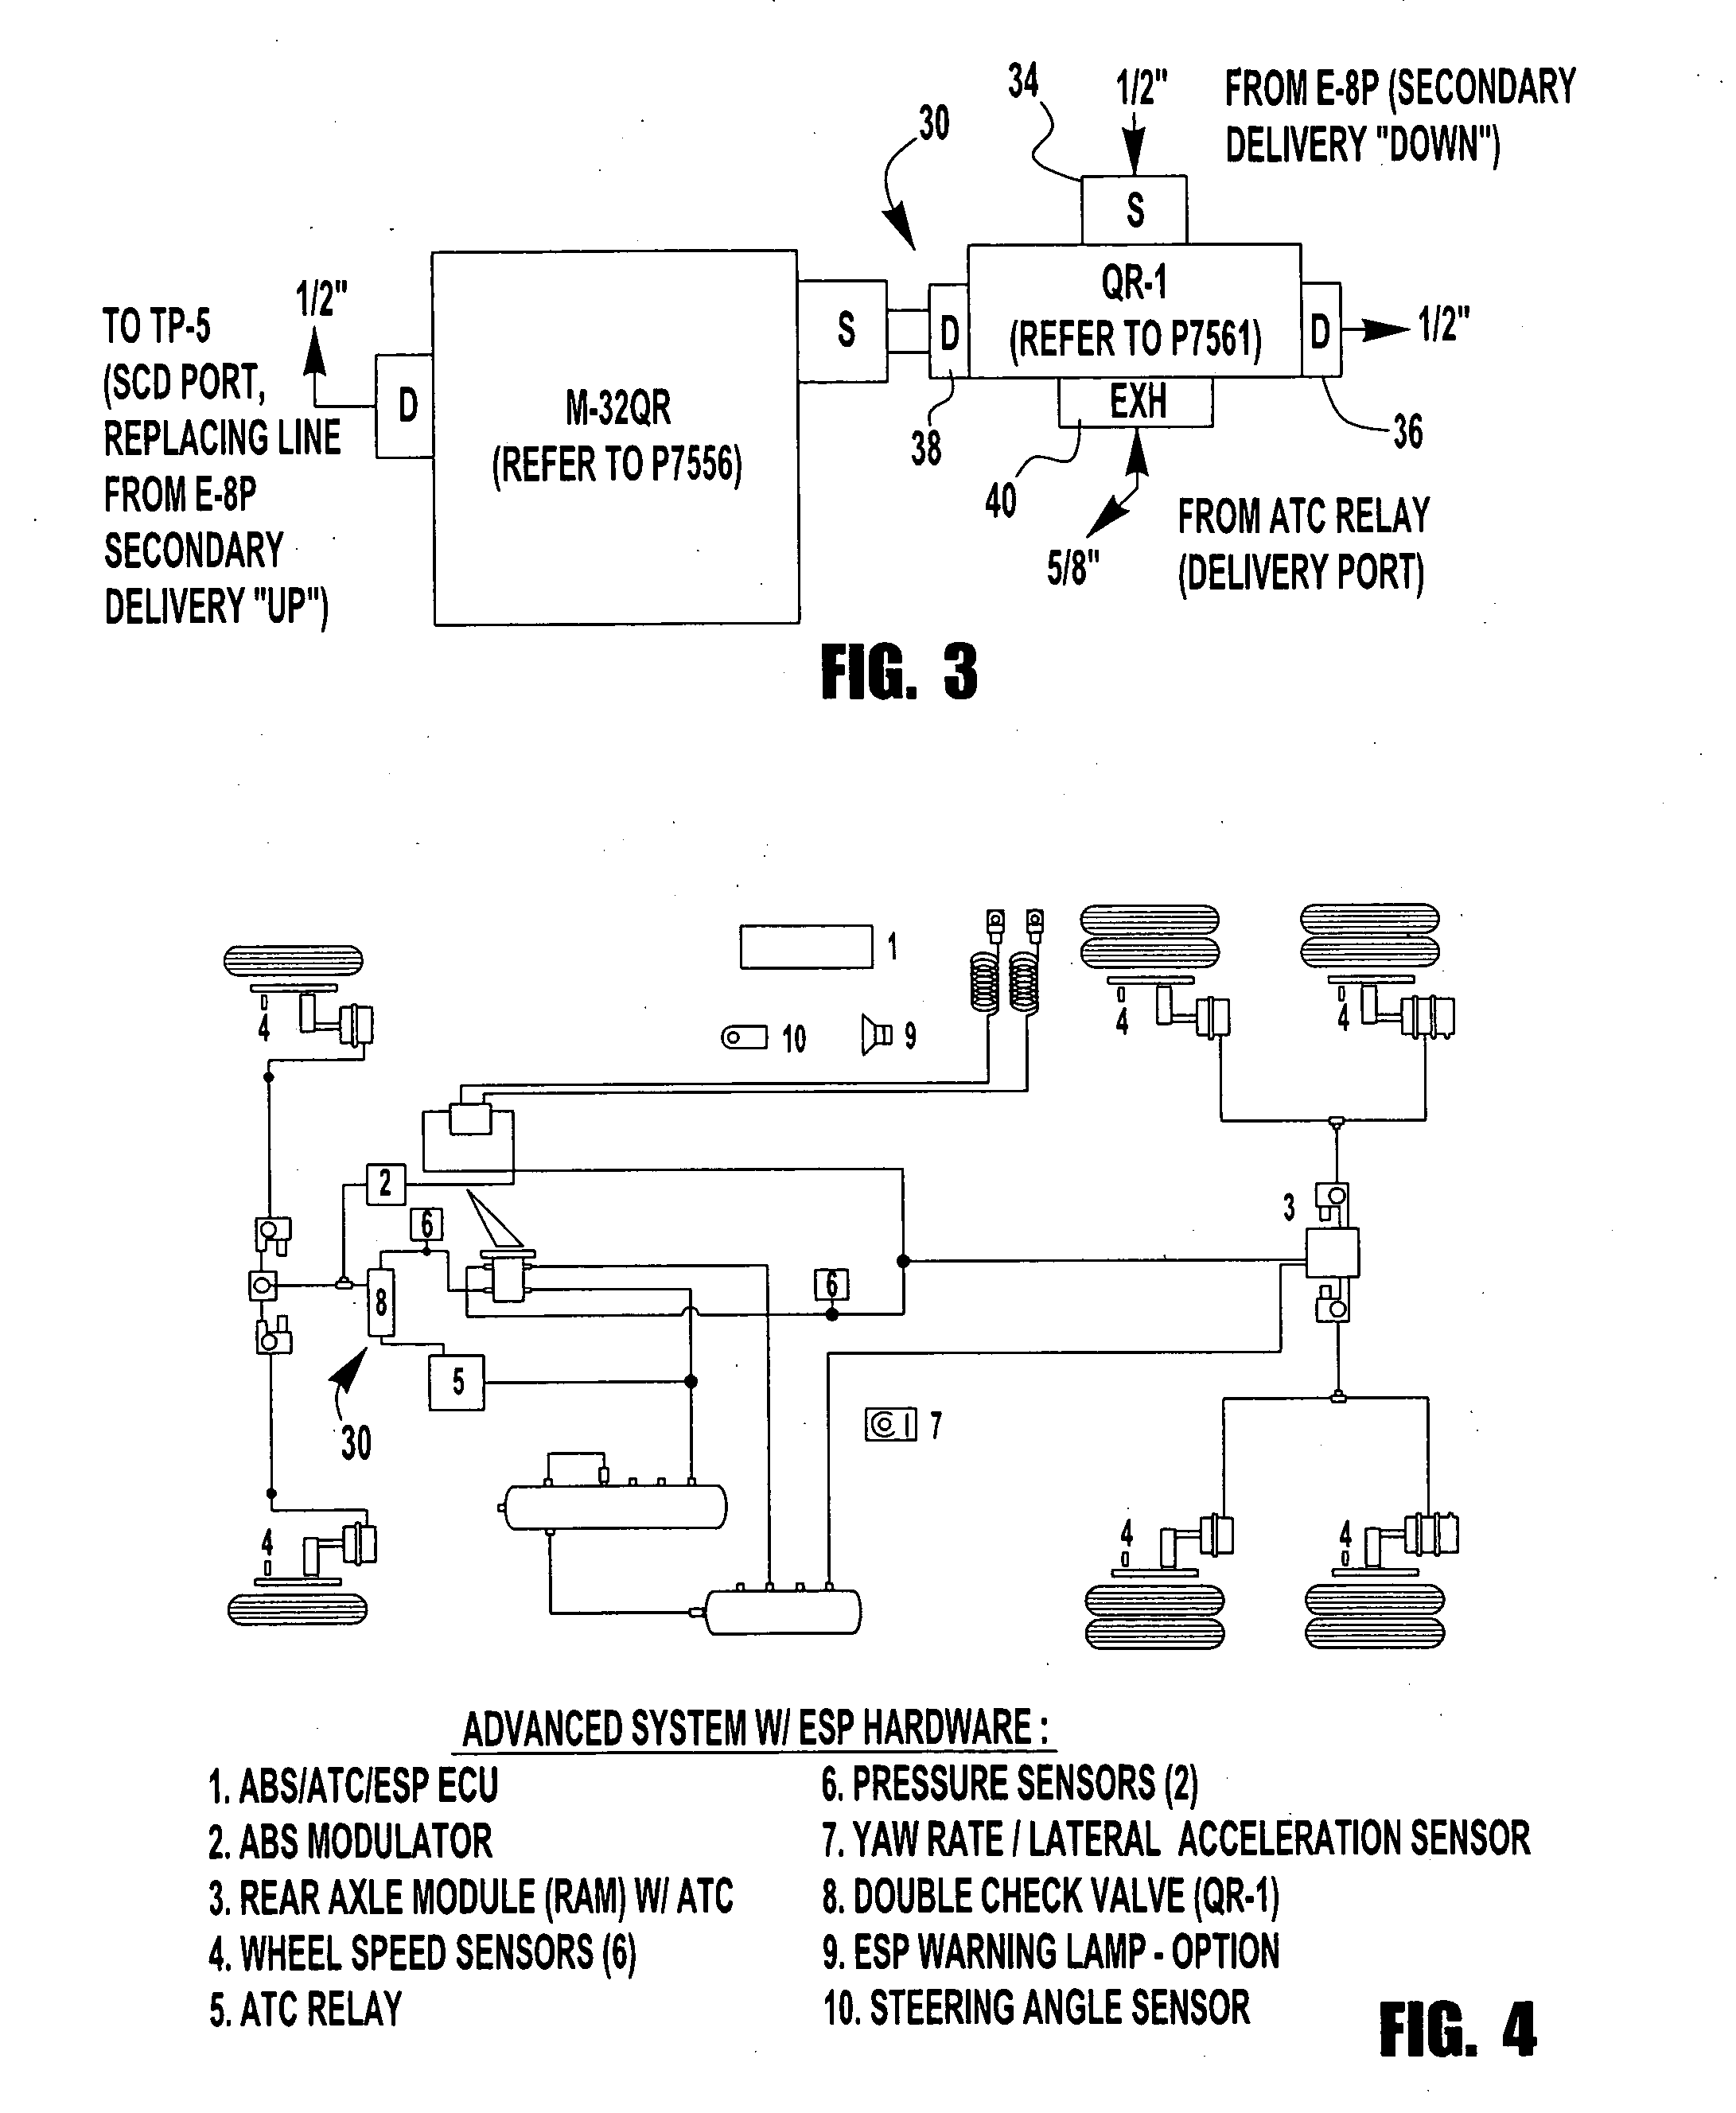 Optimized brake release timing using a quick release valve